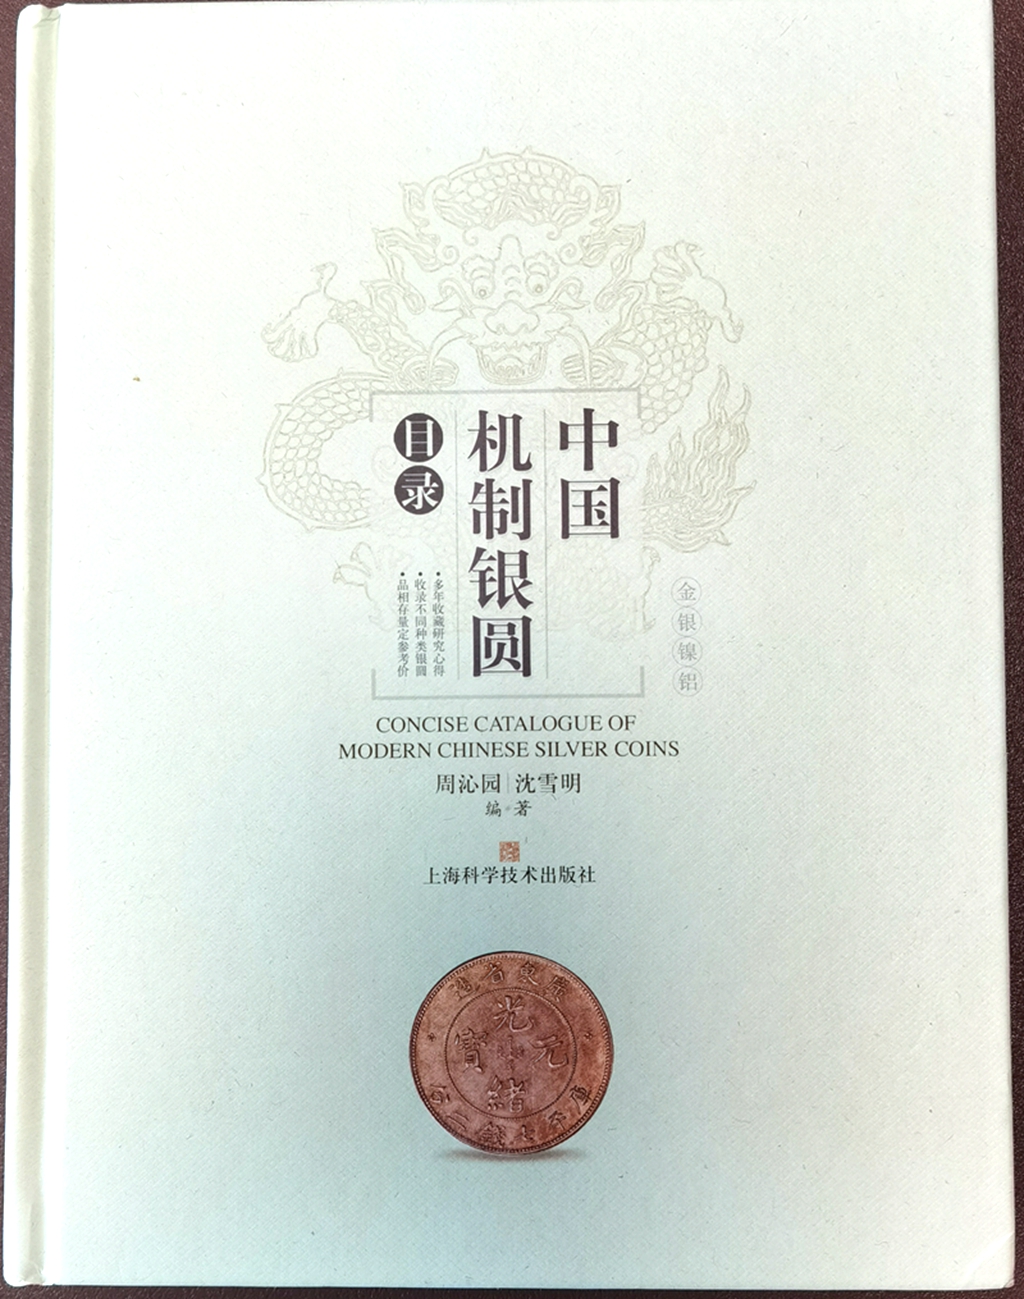 F1528, Concise Catalogue of Chinese Silver Coins, New Ediiton (2021)